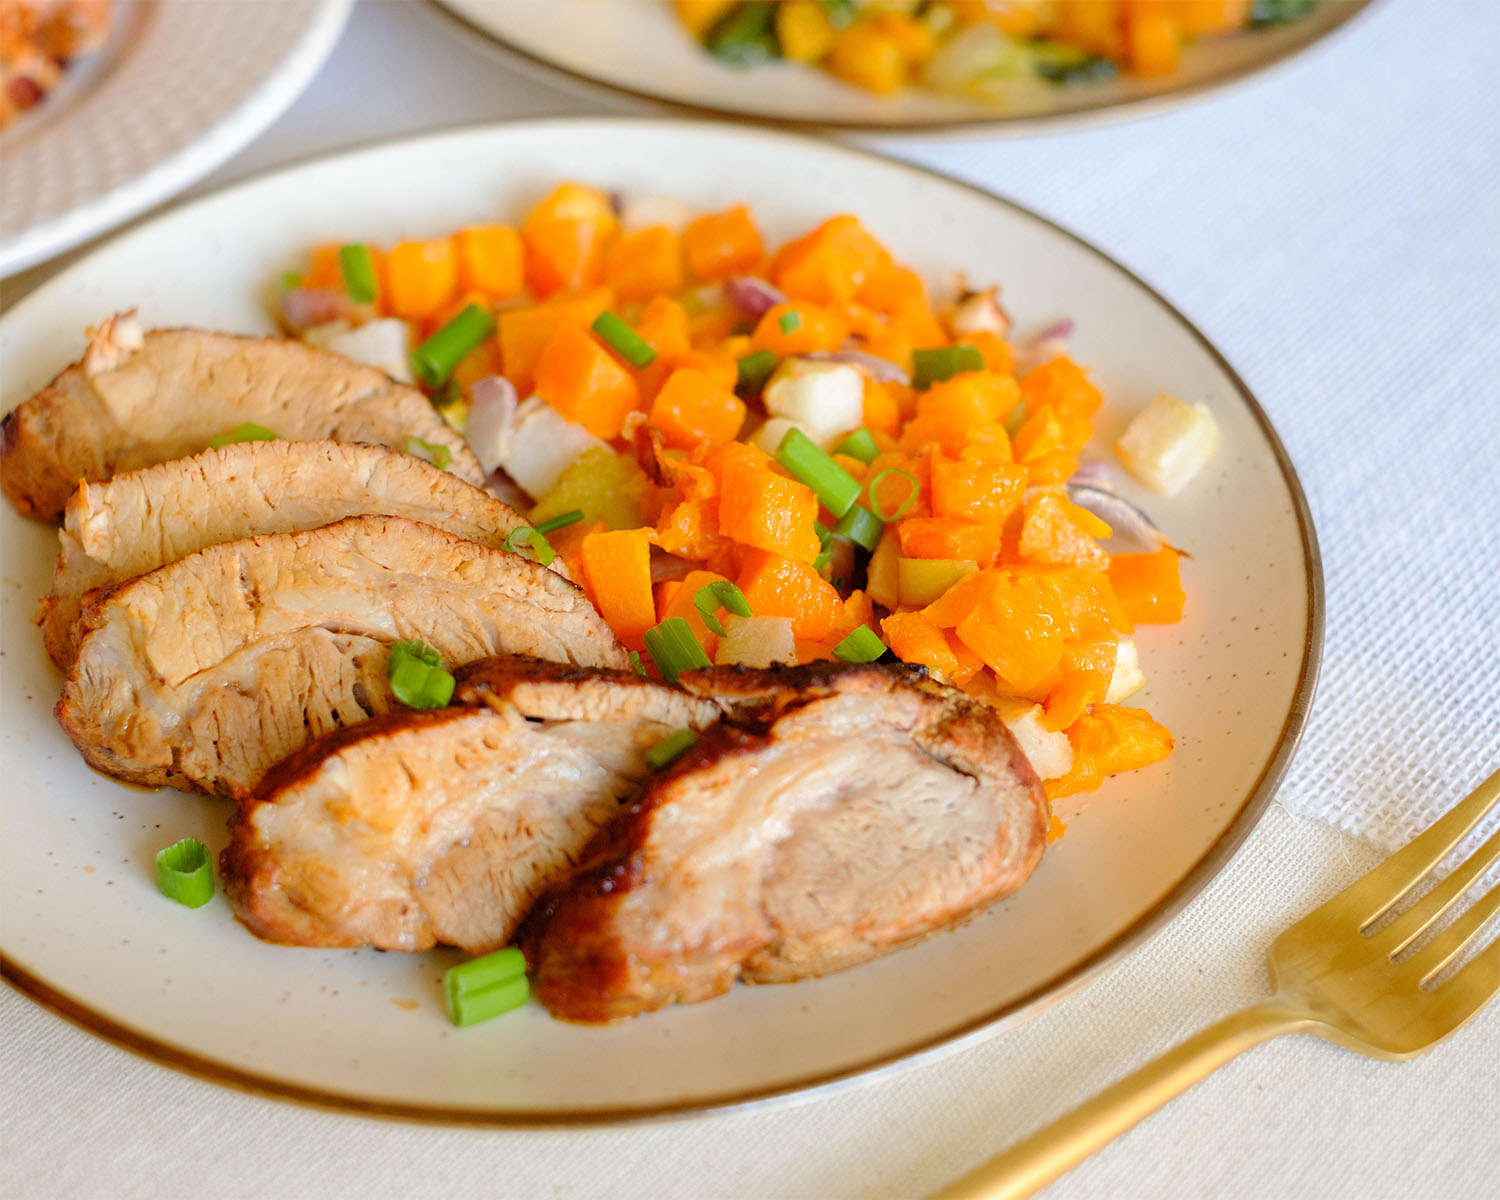 Round plate with sliced pork tenderloin and diced butternut squash.